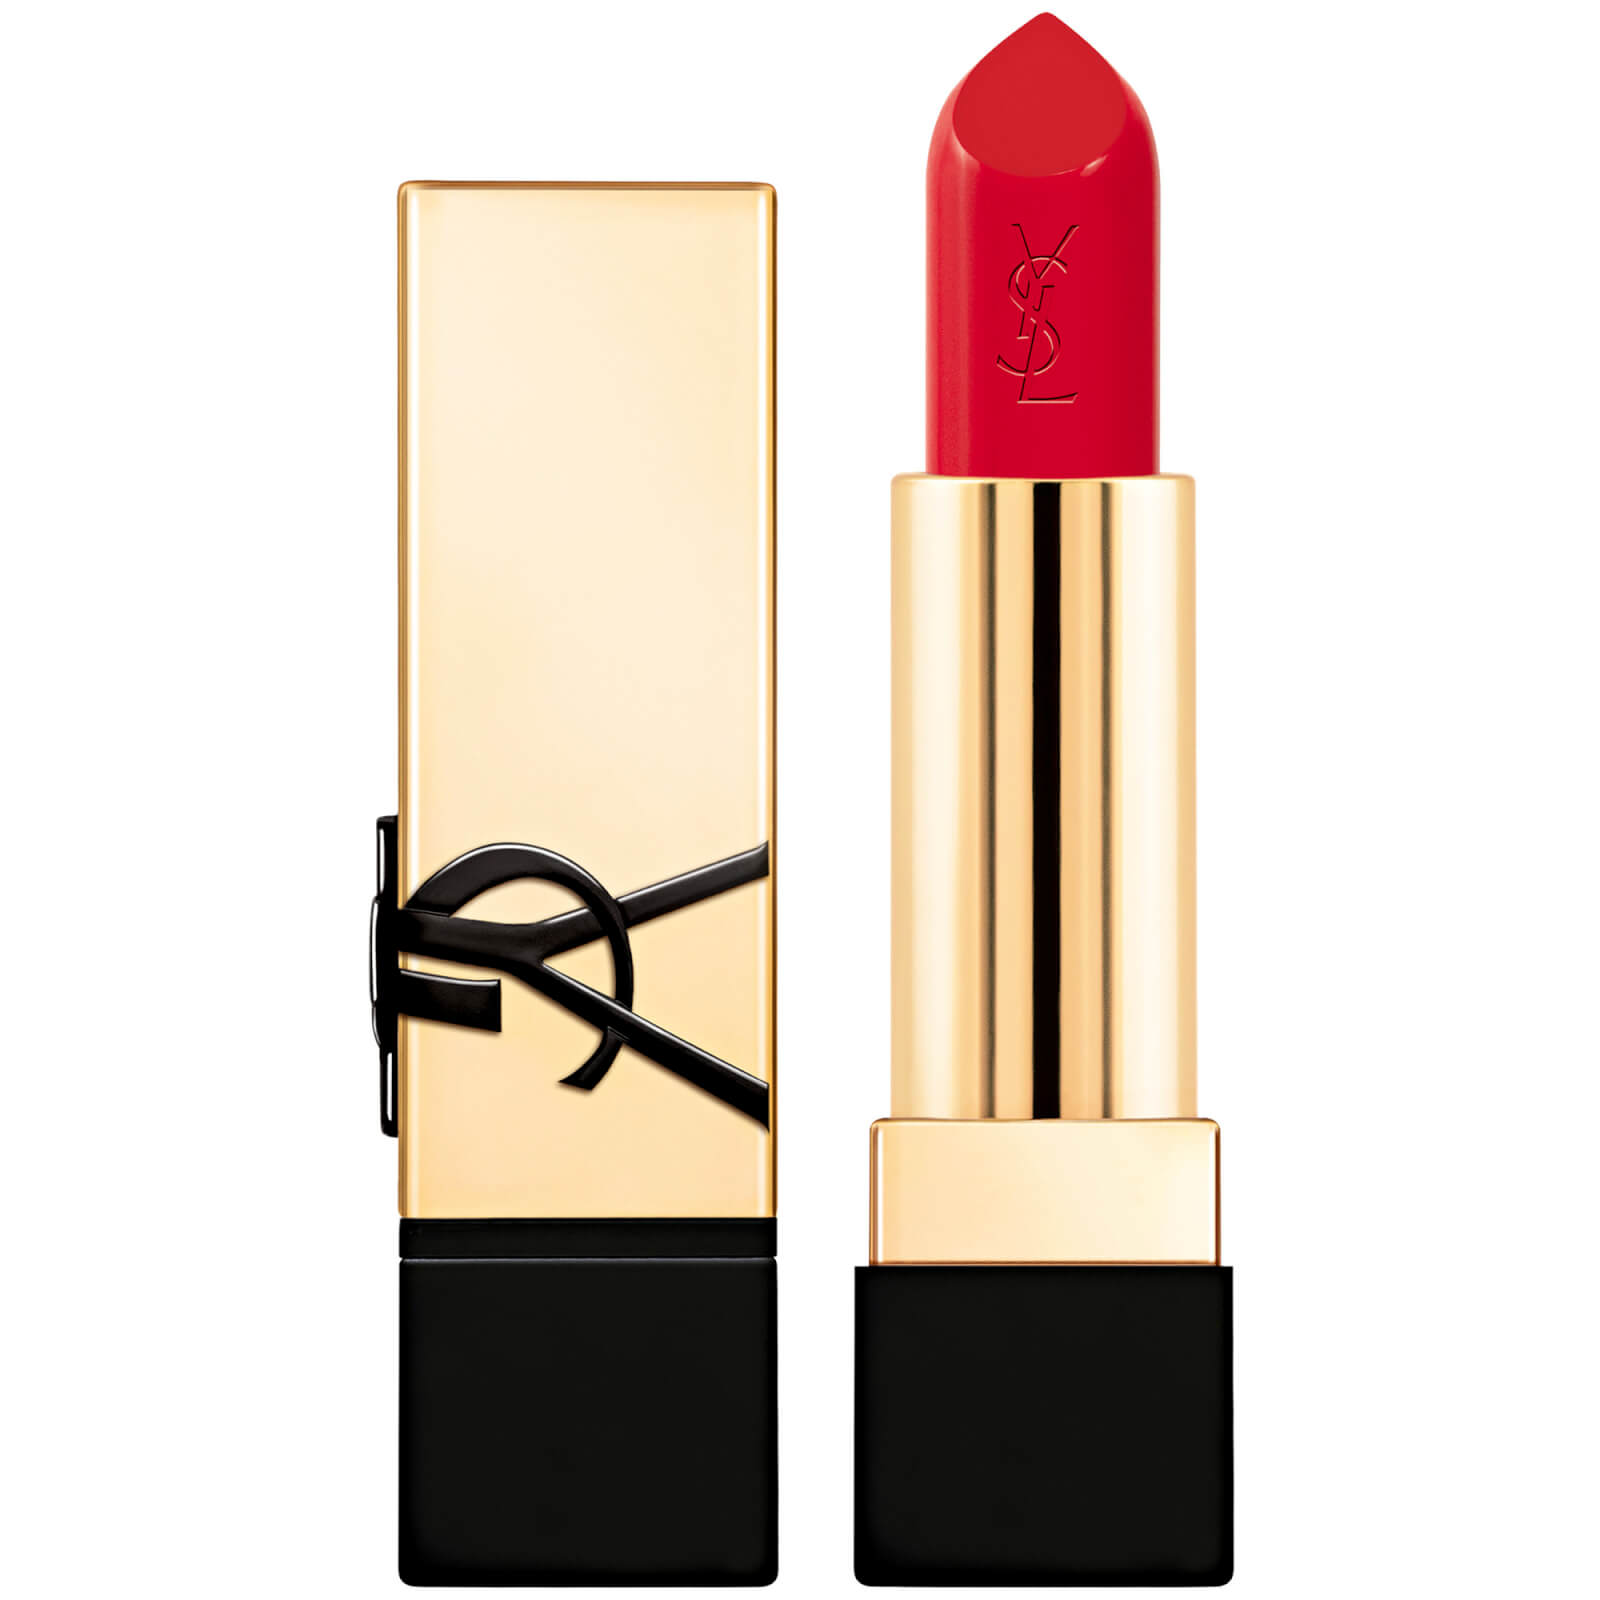 Ysl Yves Saint Laurent Rouge Pur Couture Renovation Lipstick 3g (various Shades) - R5